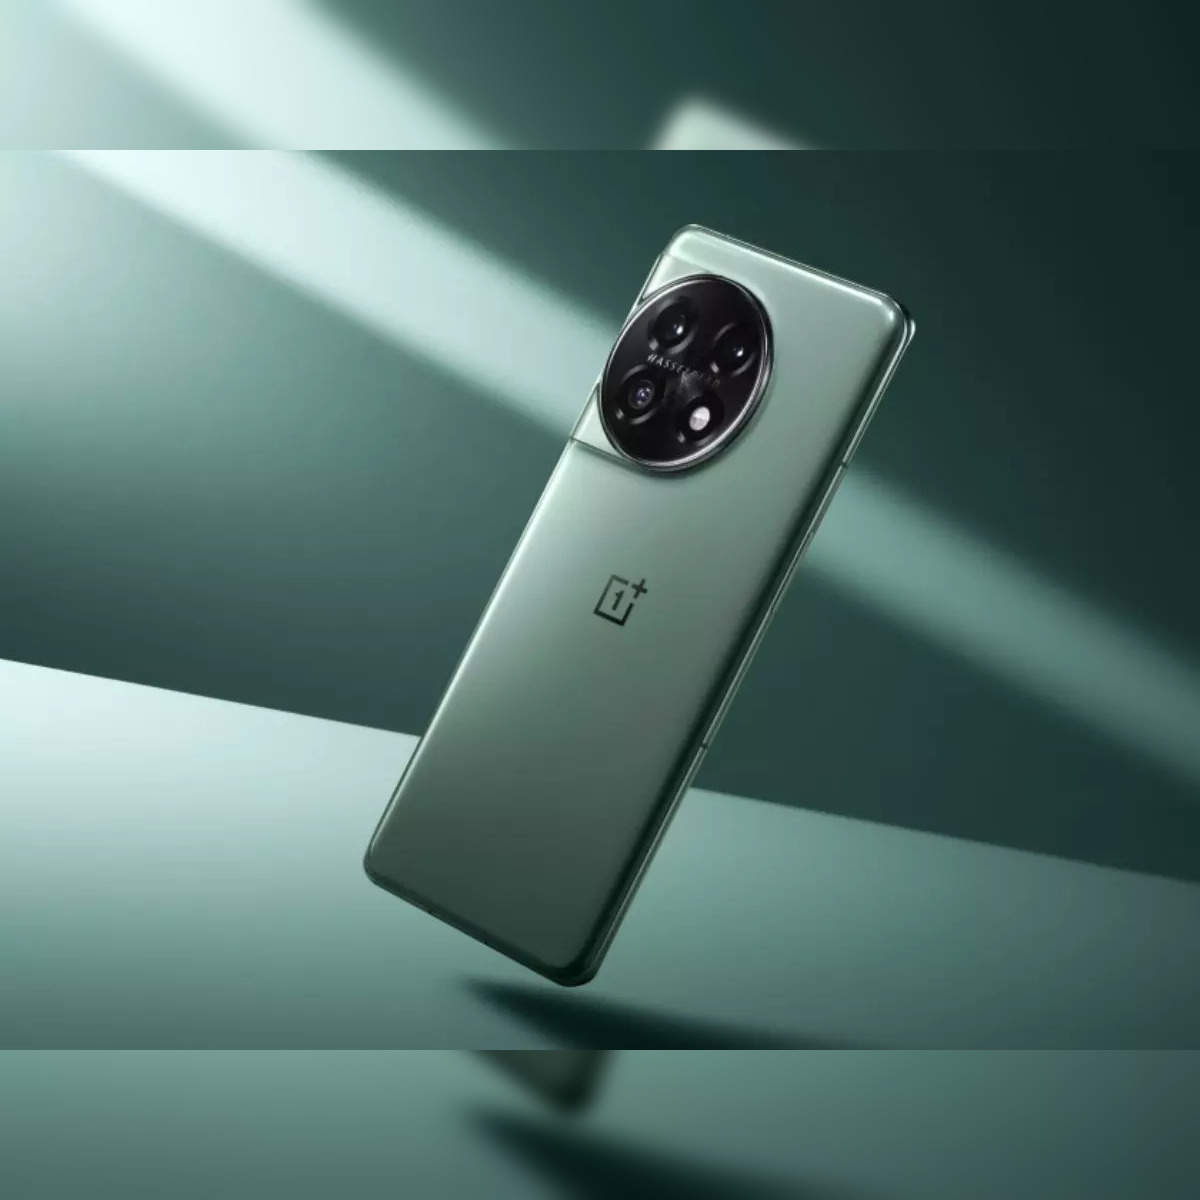 OnePlus 12: Company confirms camera system, ultra-bright display